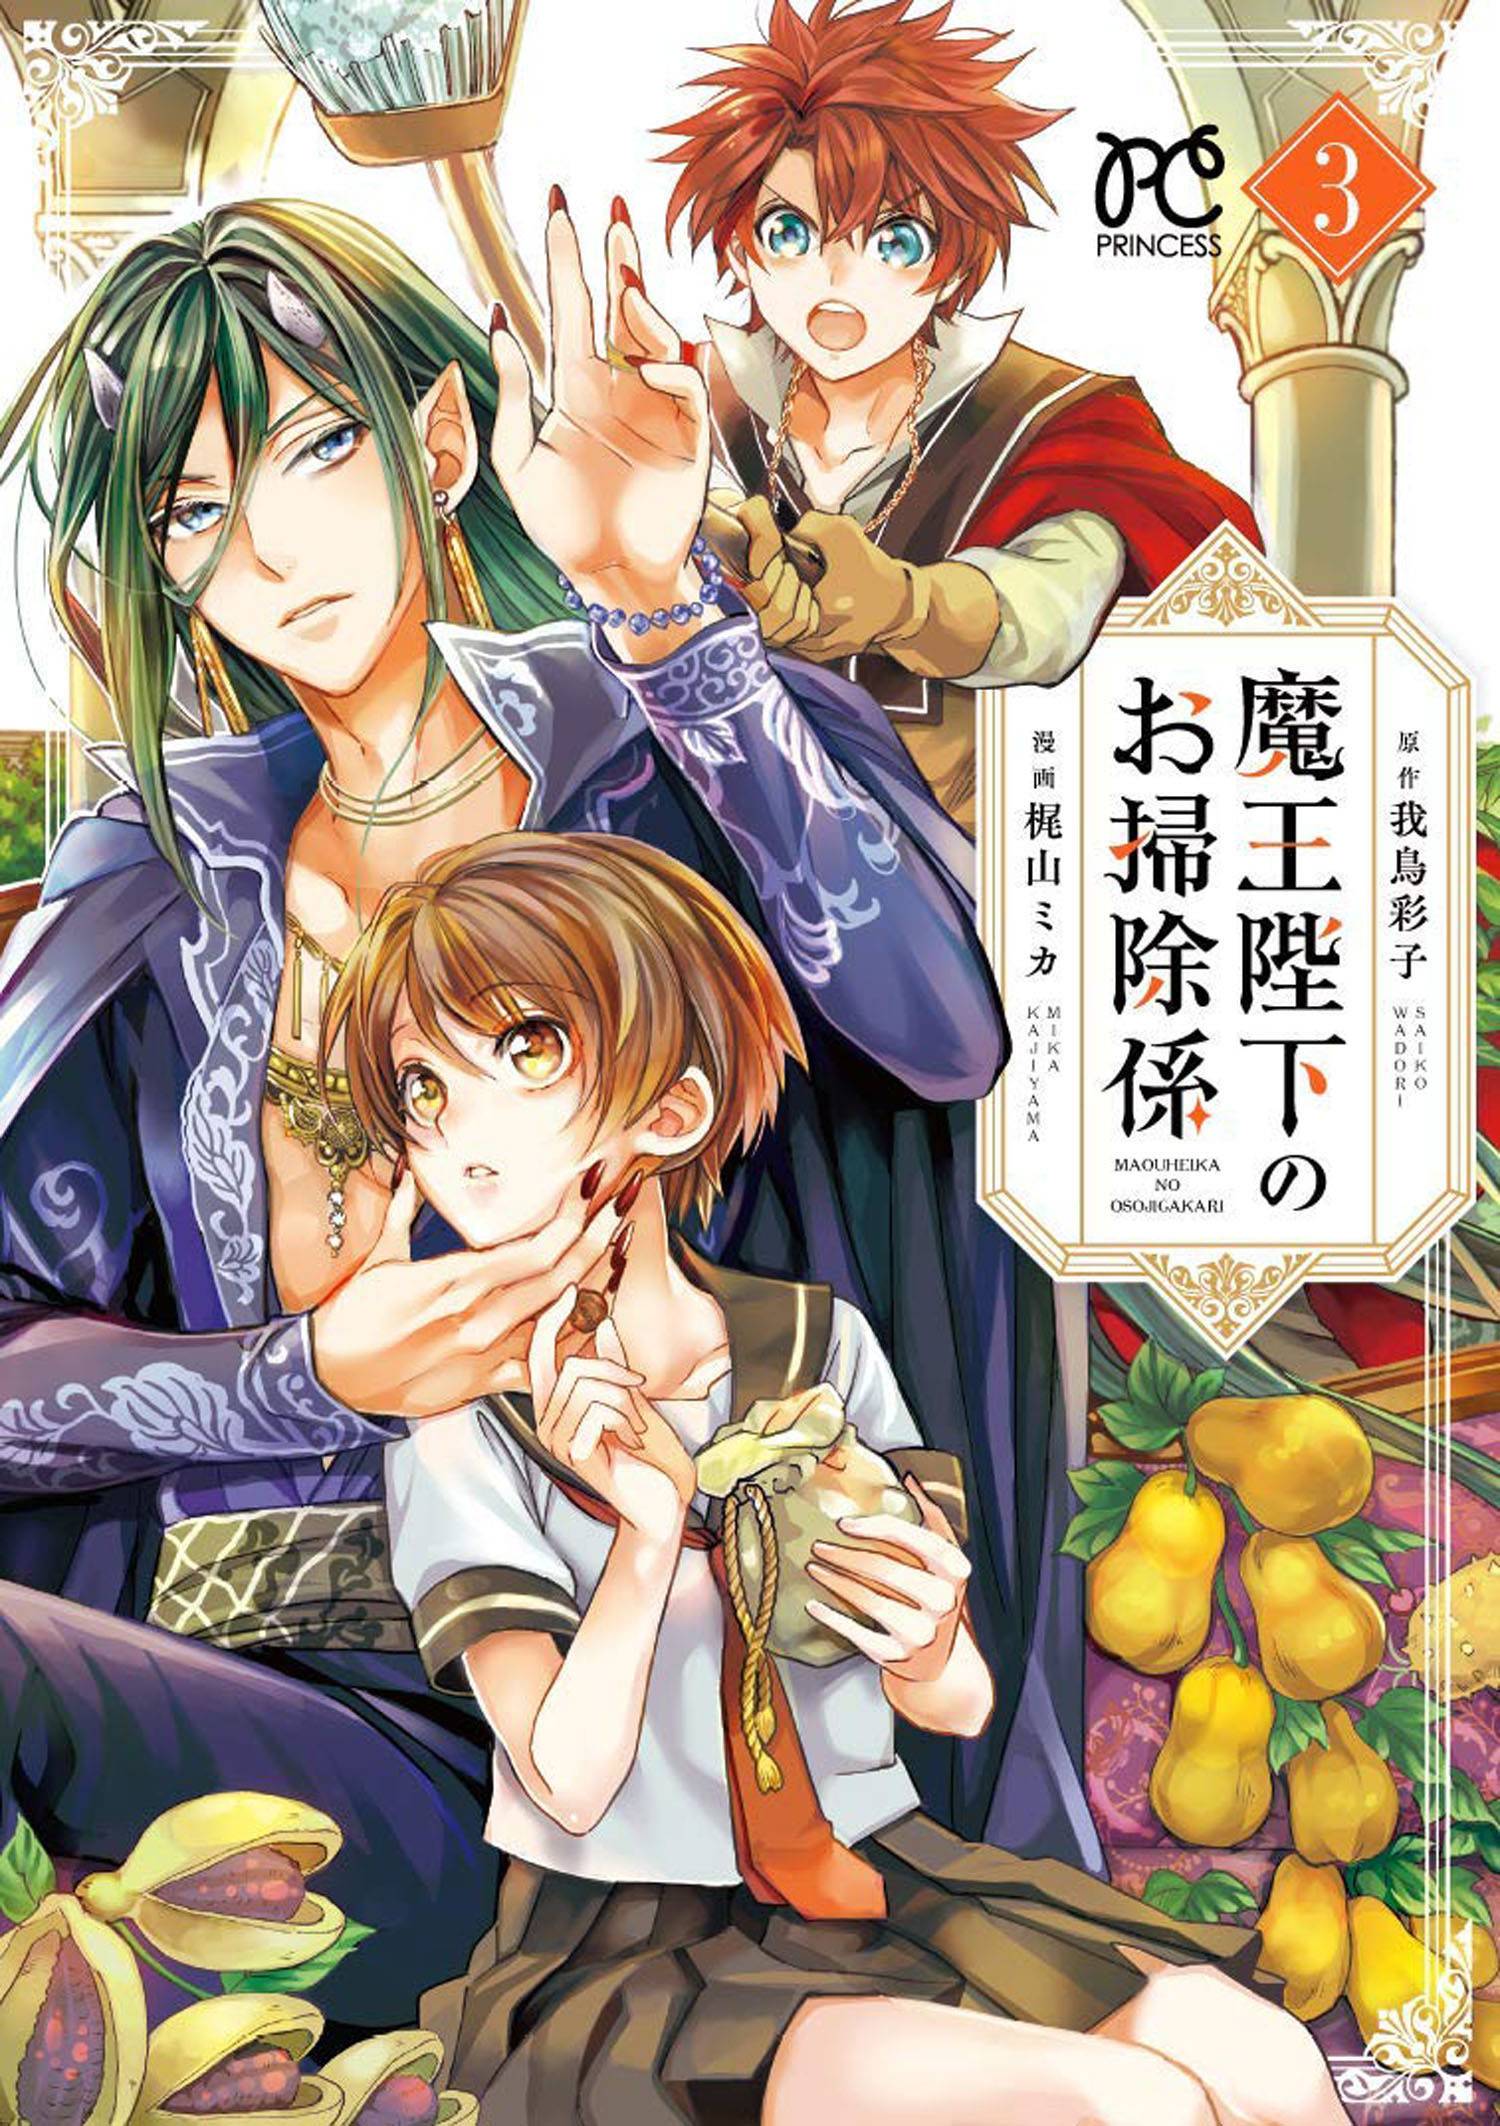 HIS MAJESTY DEMON KINGS HOUSEKEEPER GN VOL 03